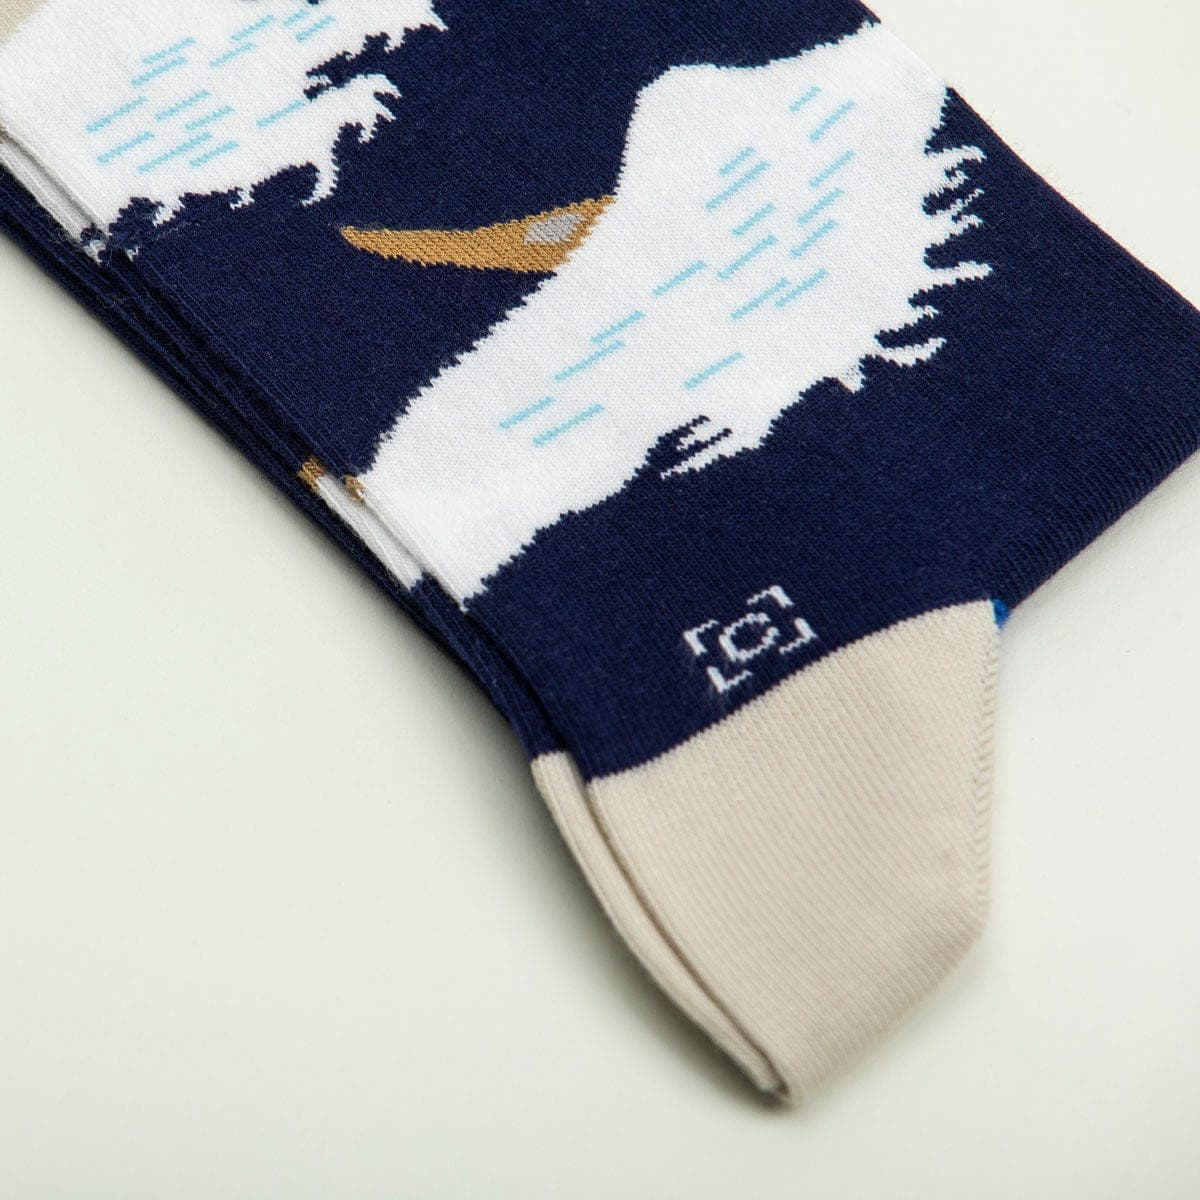 Le Bar a Chaussettes - Great Wave Socks